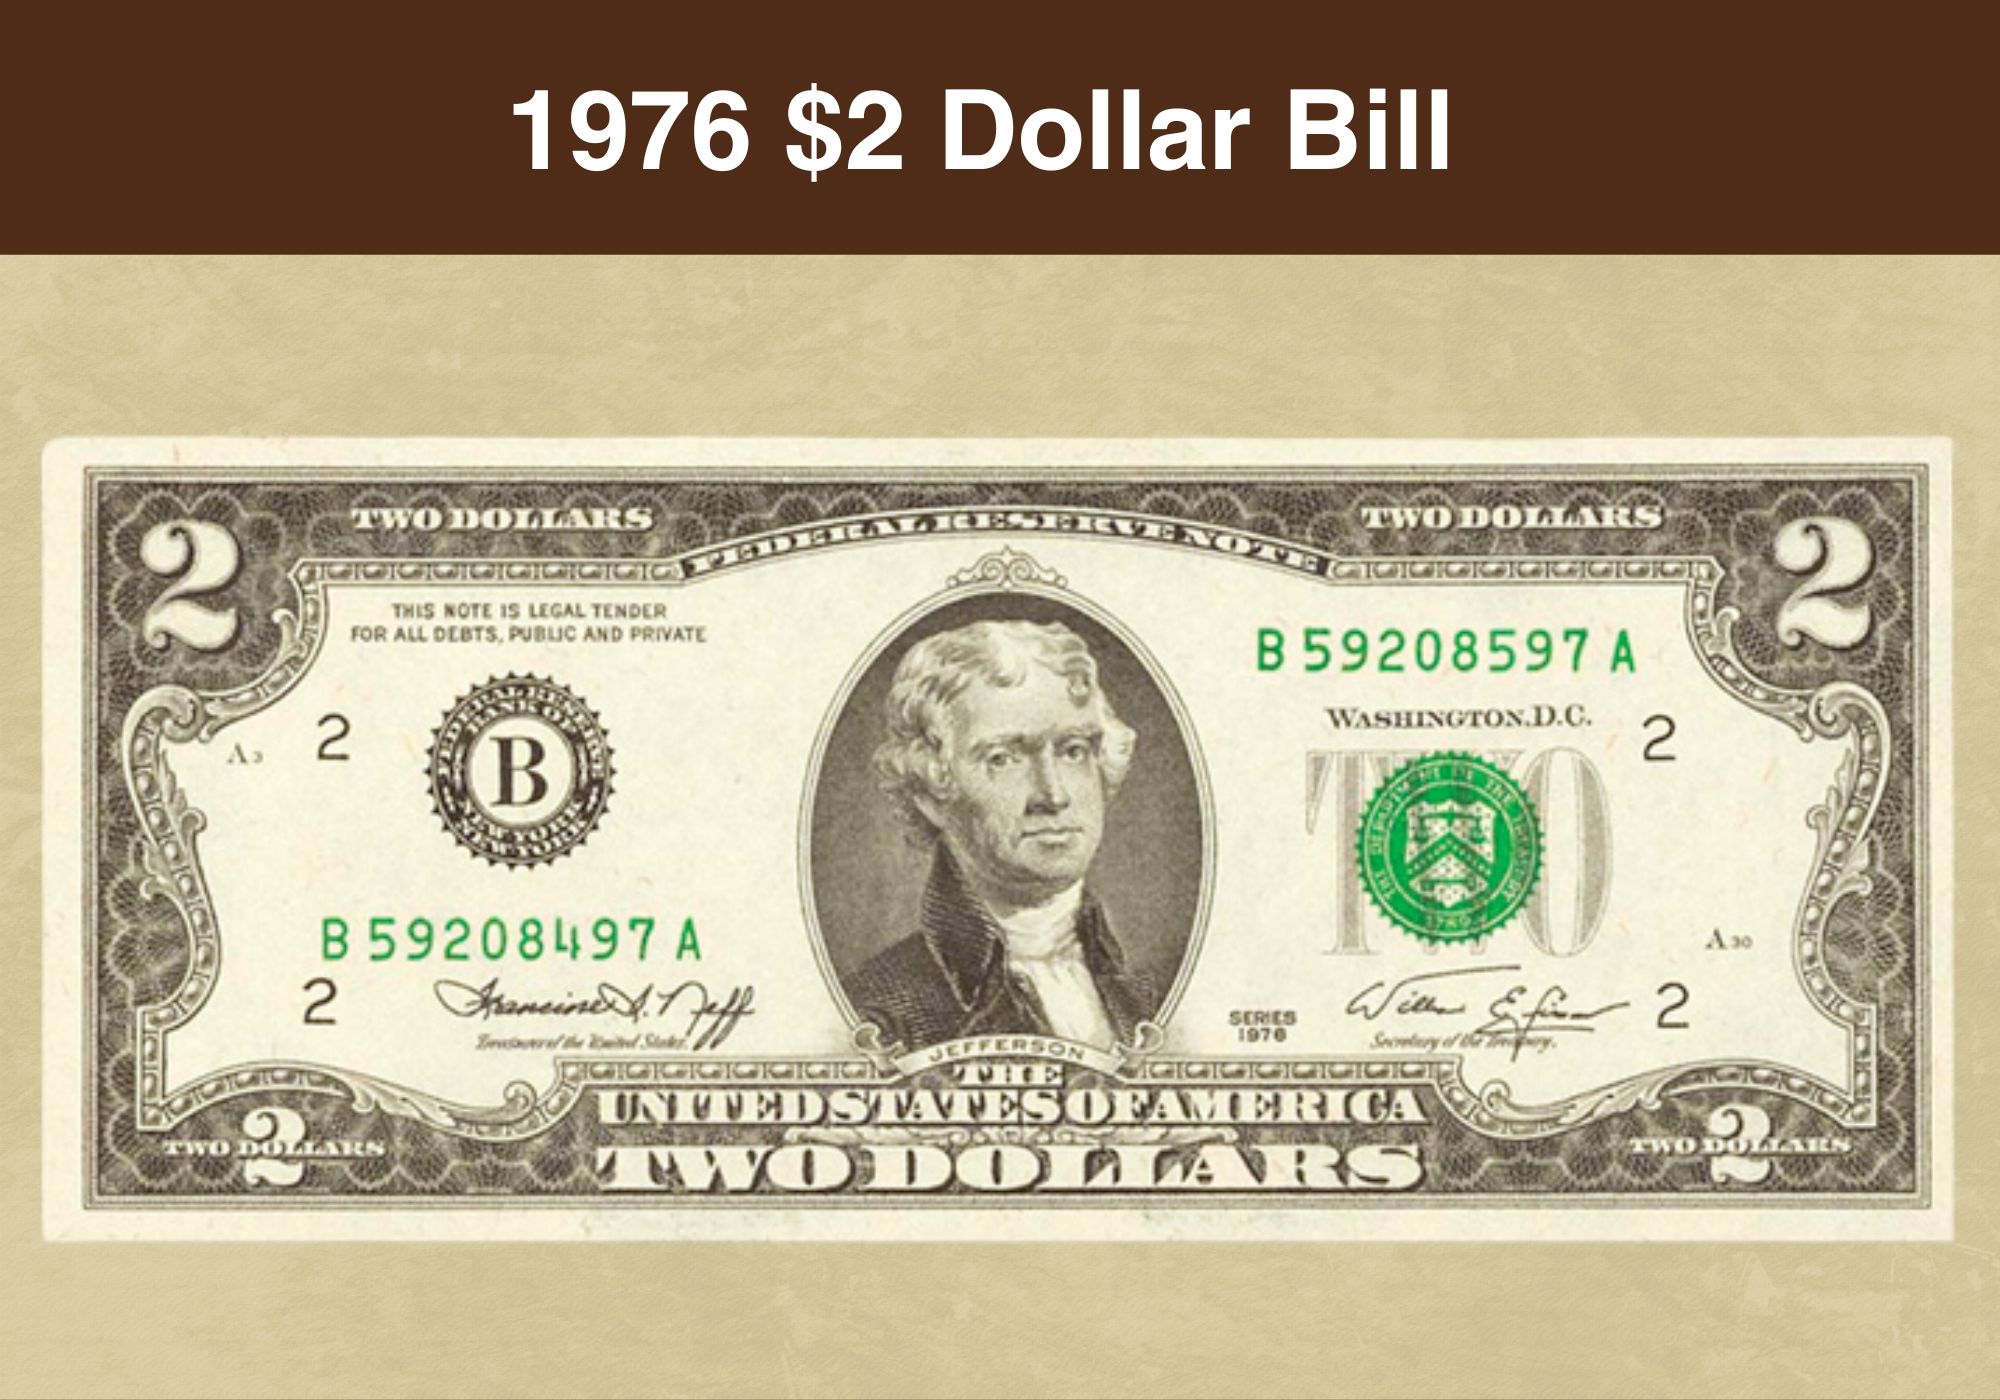 Treasury Penny and $10 Bill Changes